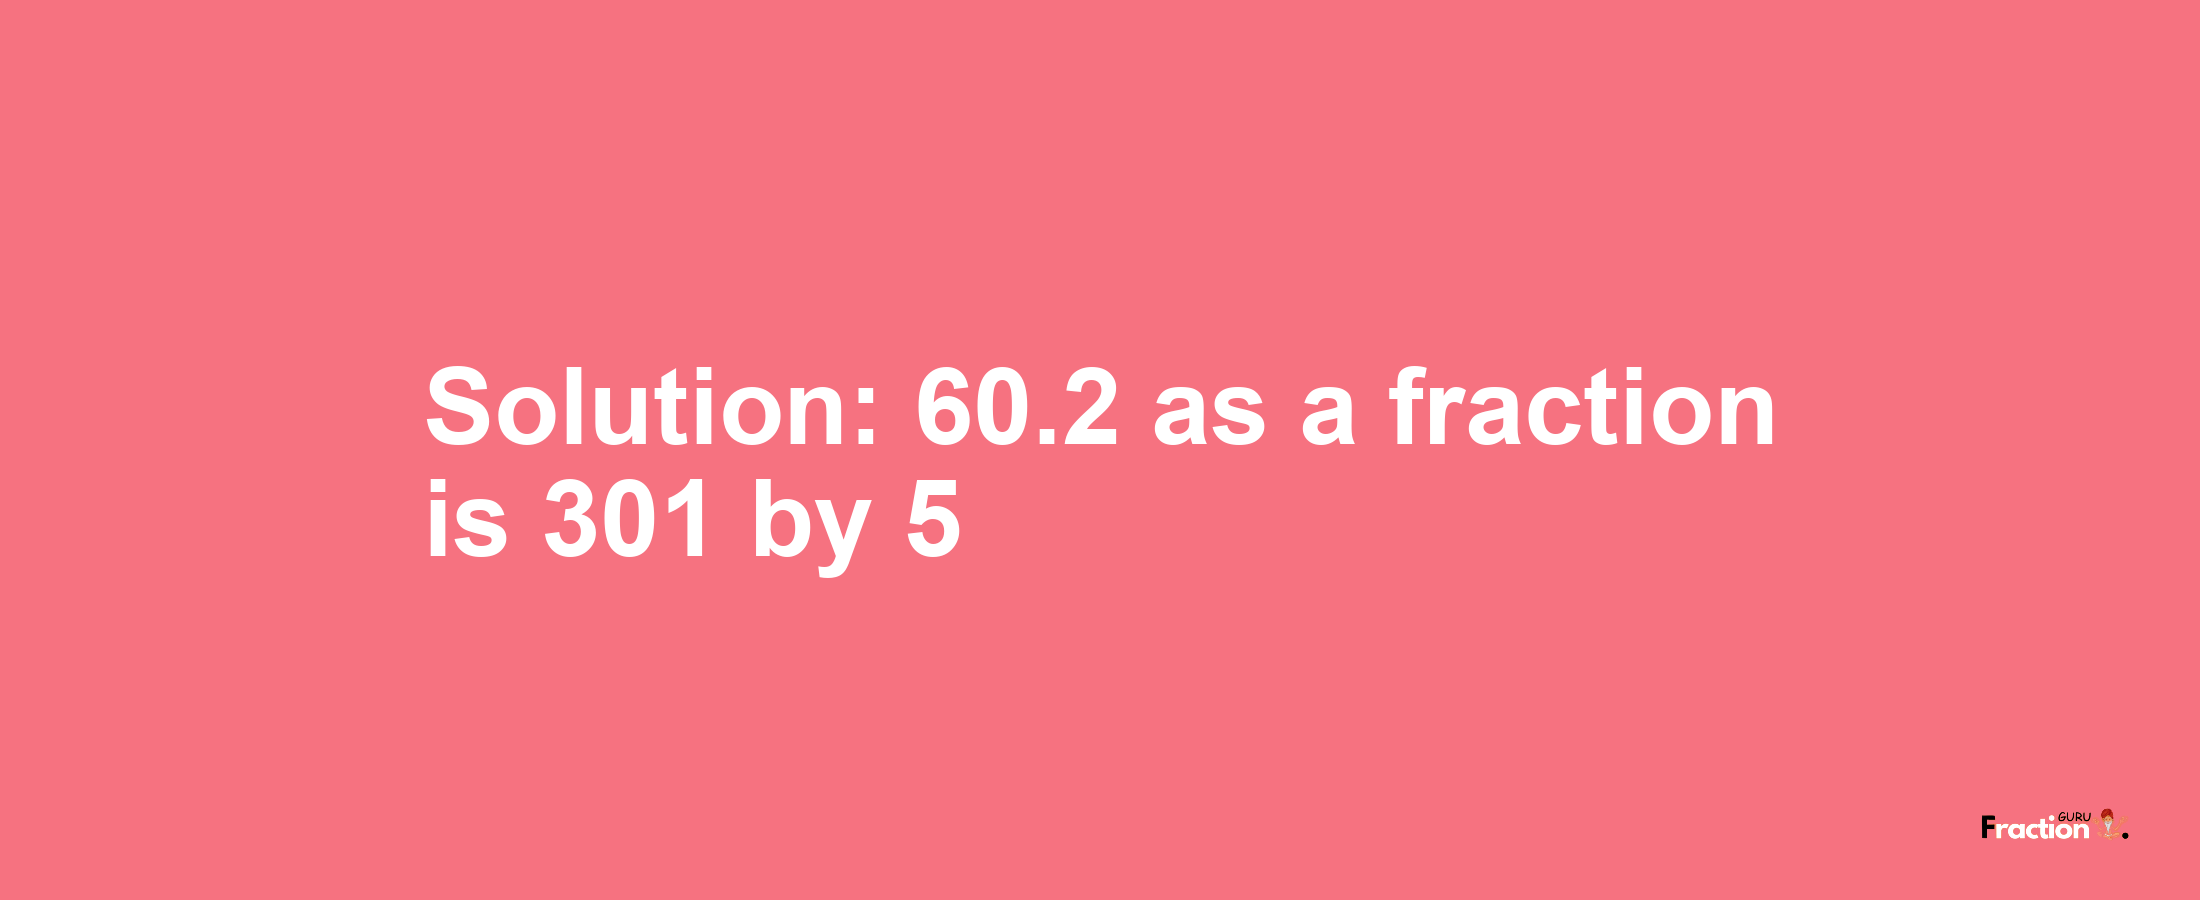 Solution:60.2 as a fraction is 301/5